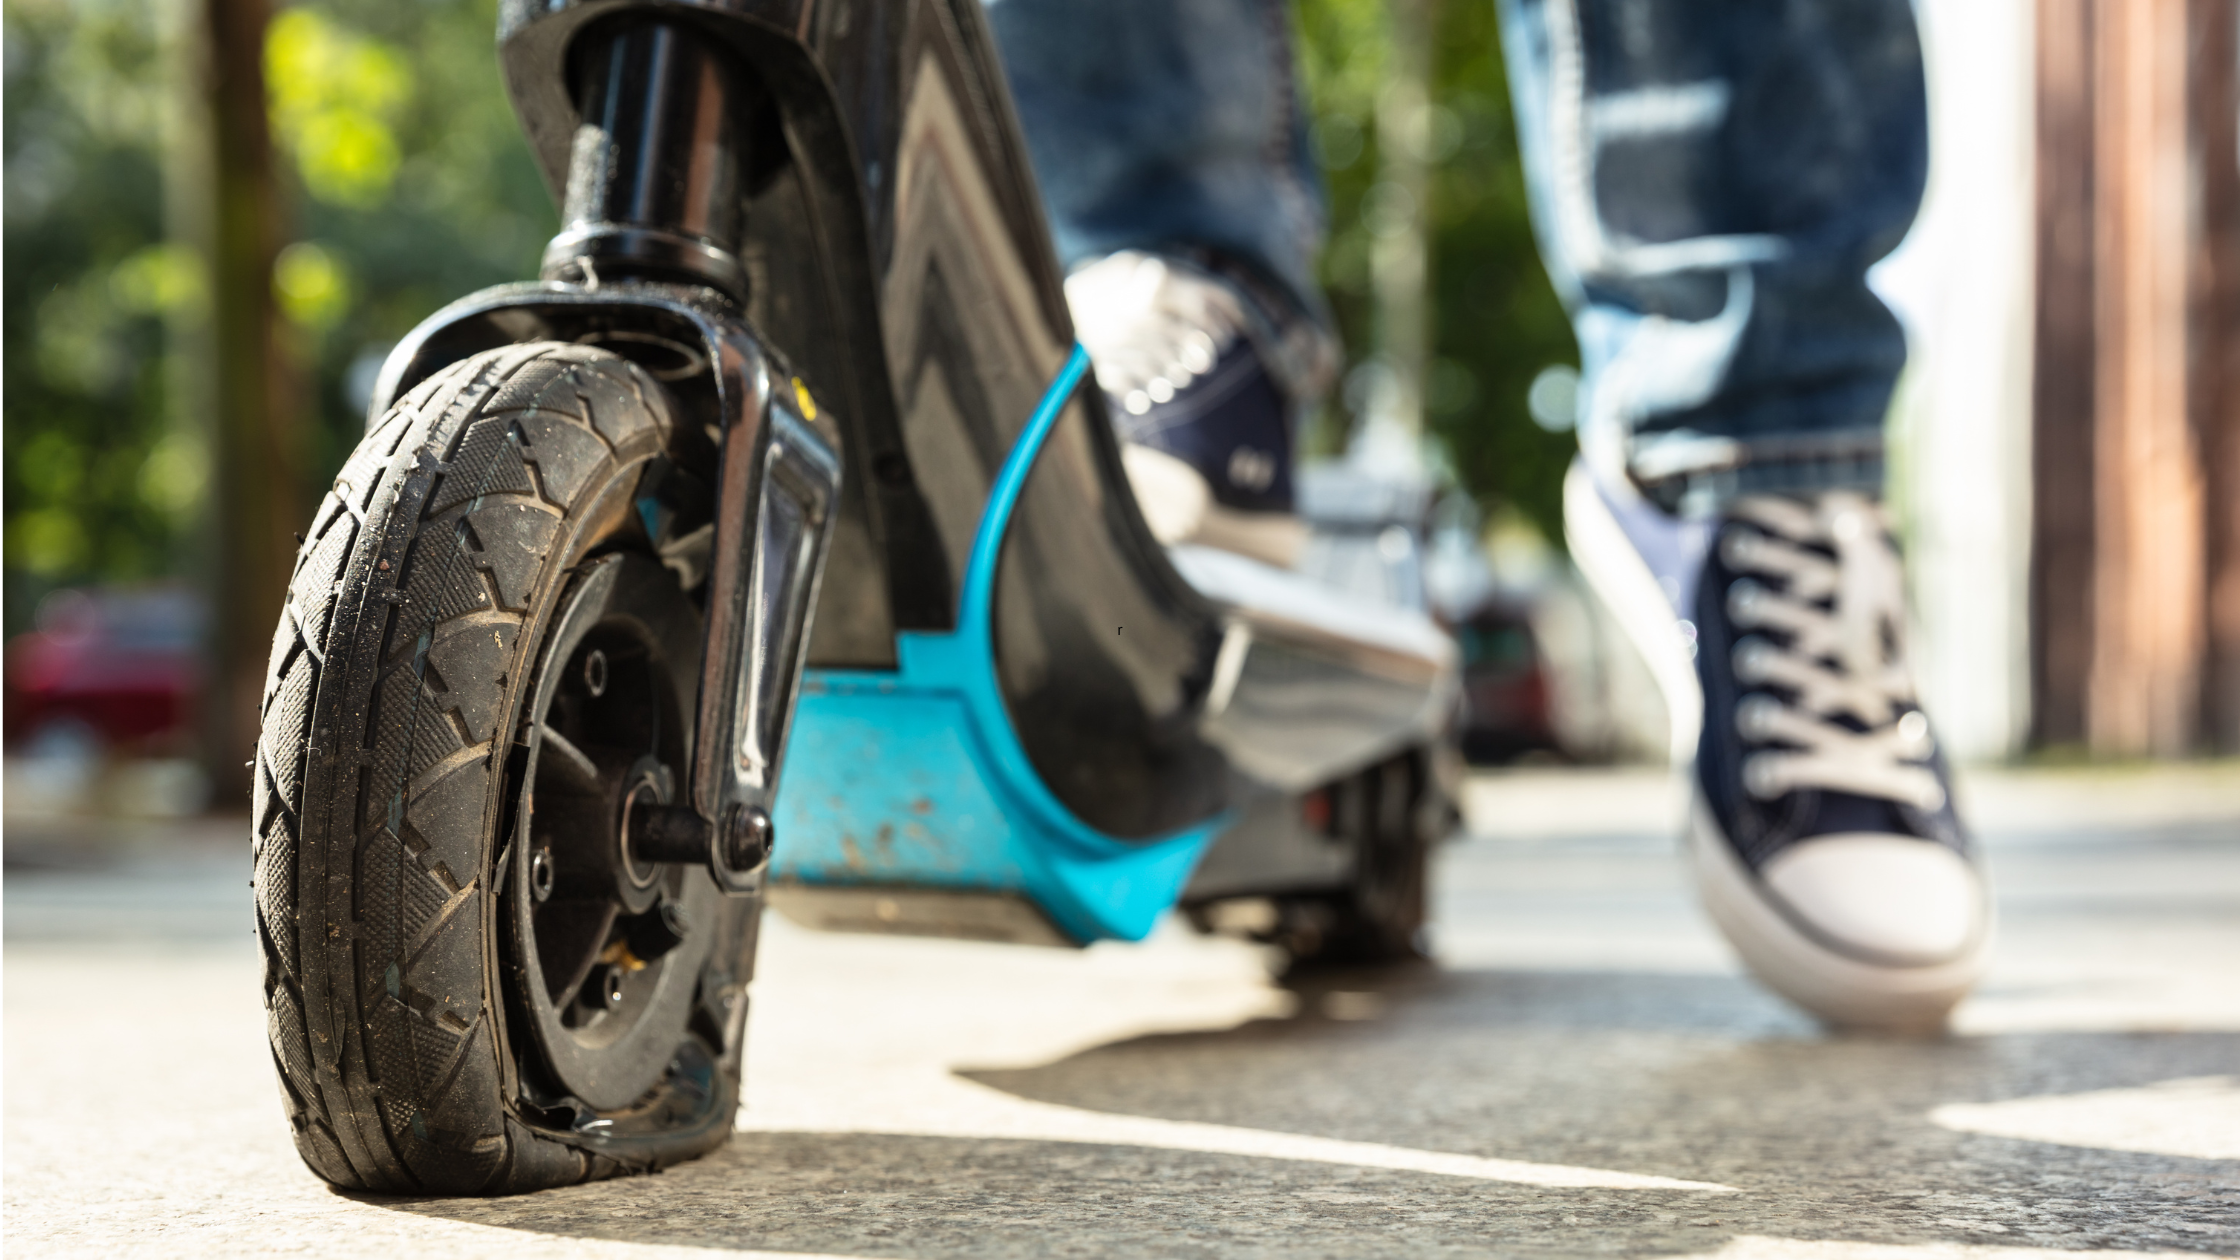 Flat tire on electric scooter